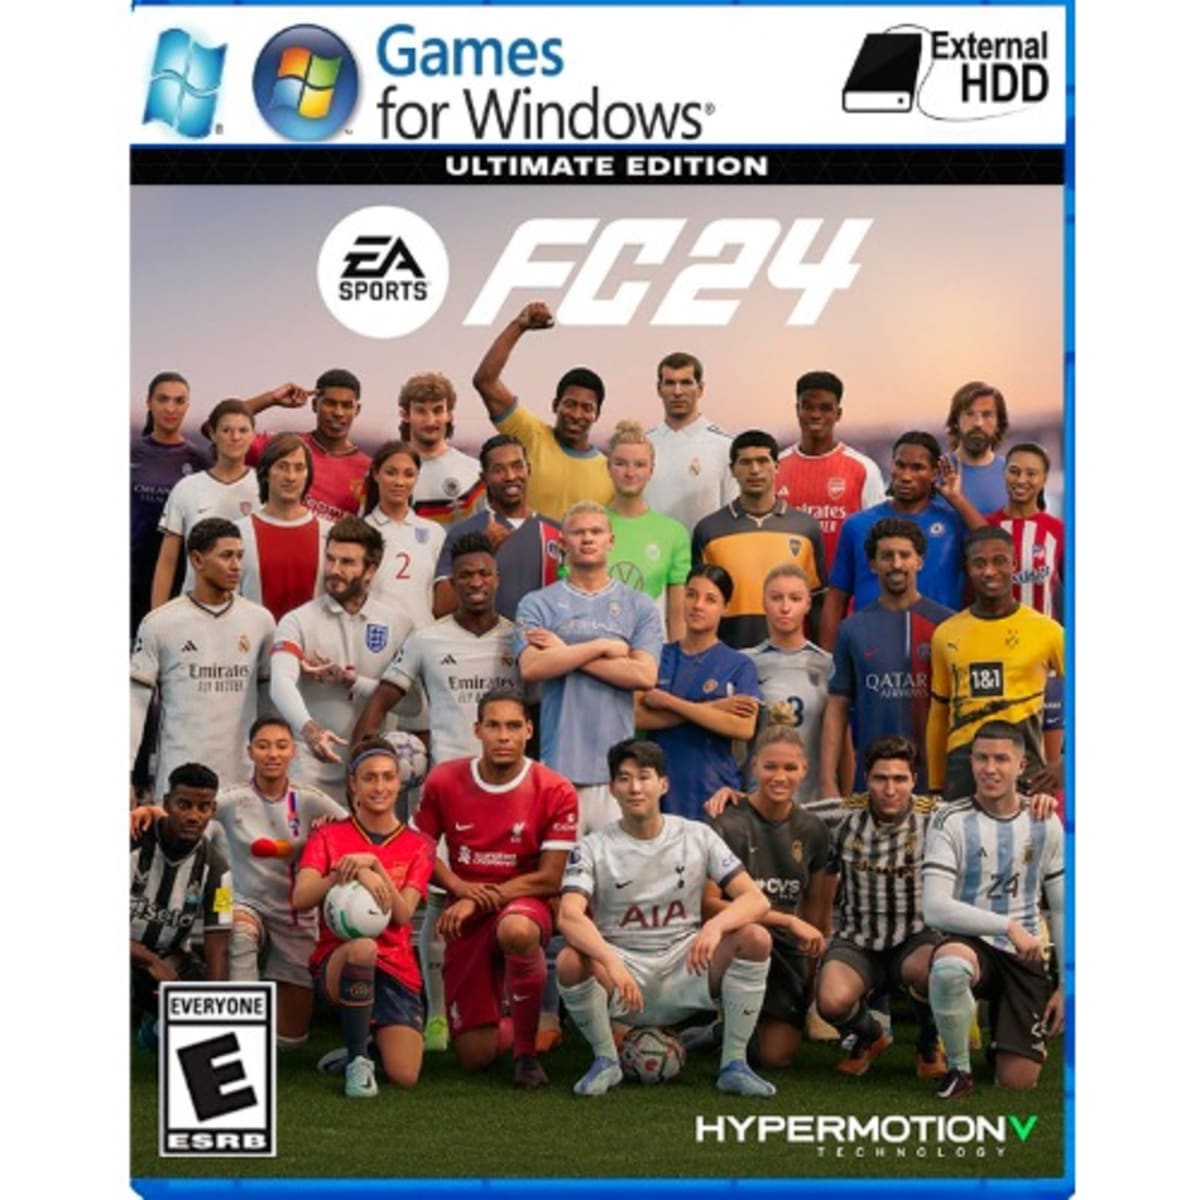 Get FIFA Game From EA Free for PC: Play Online or Offline